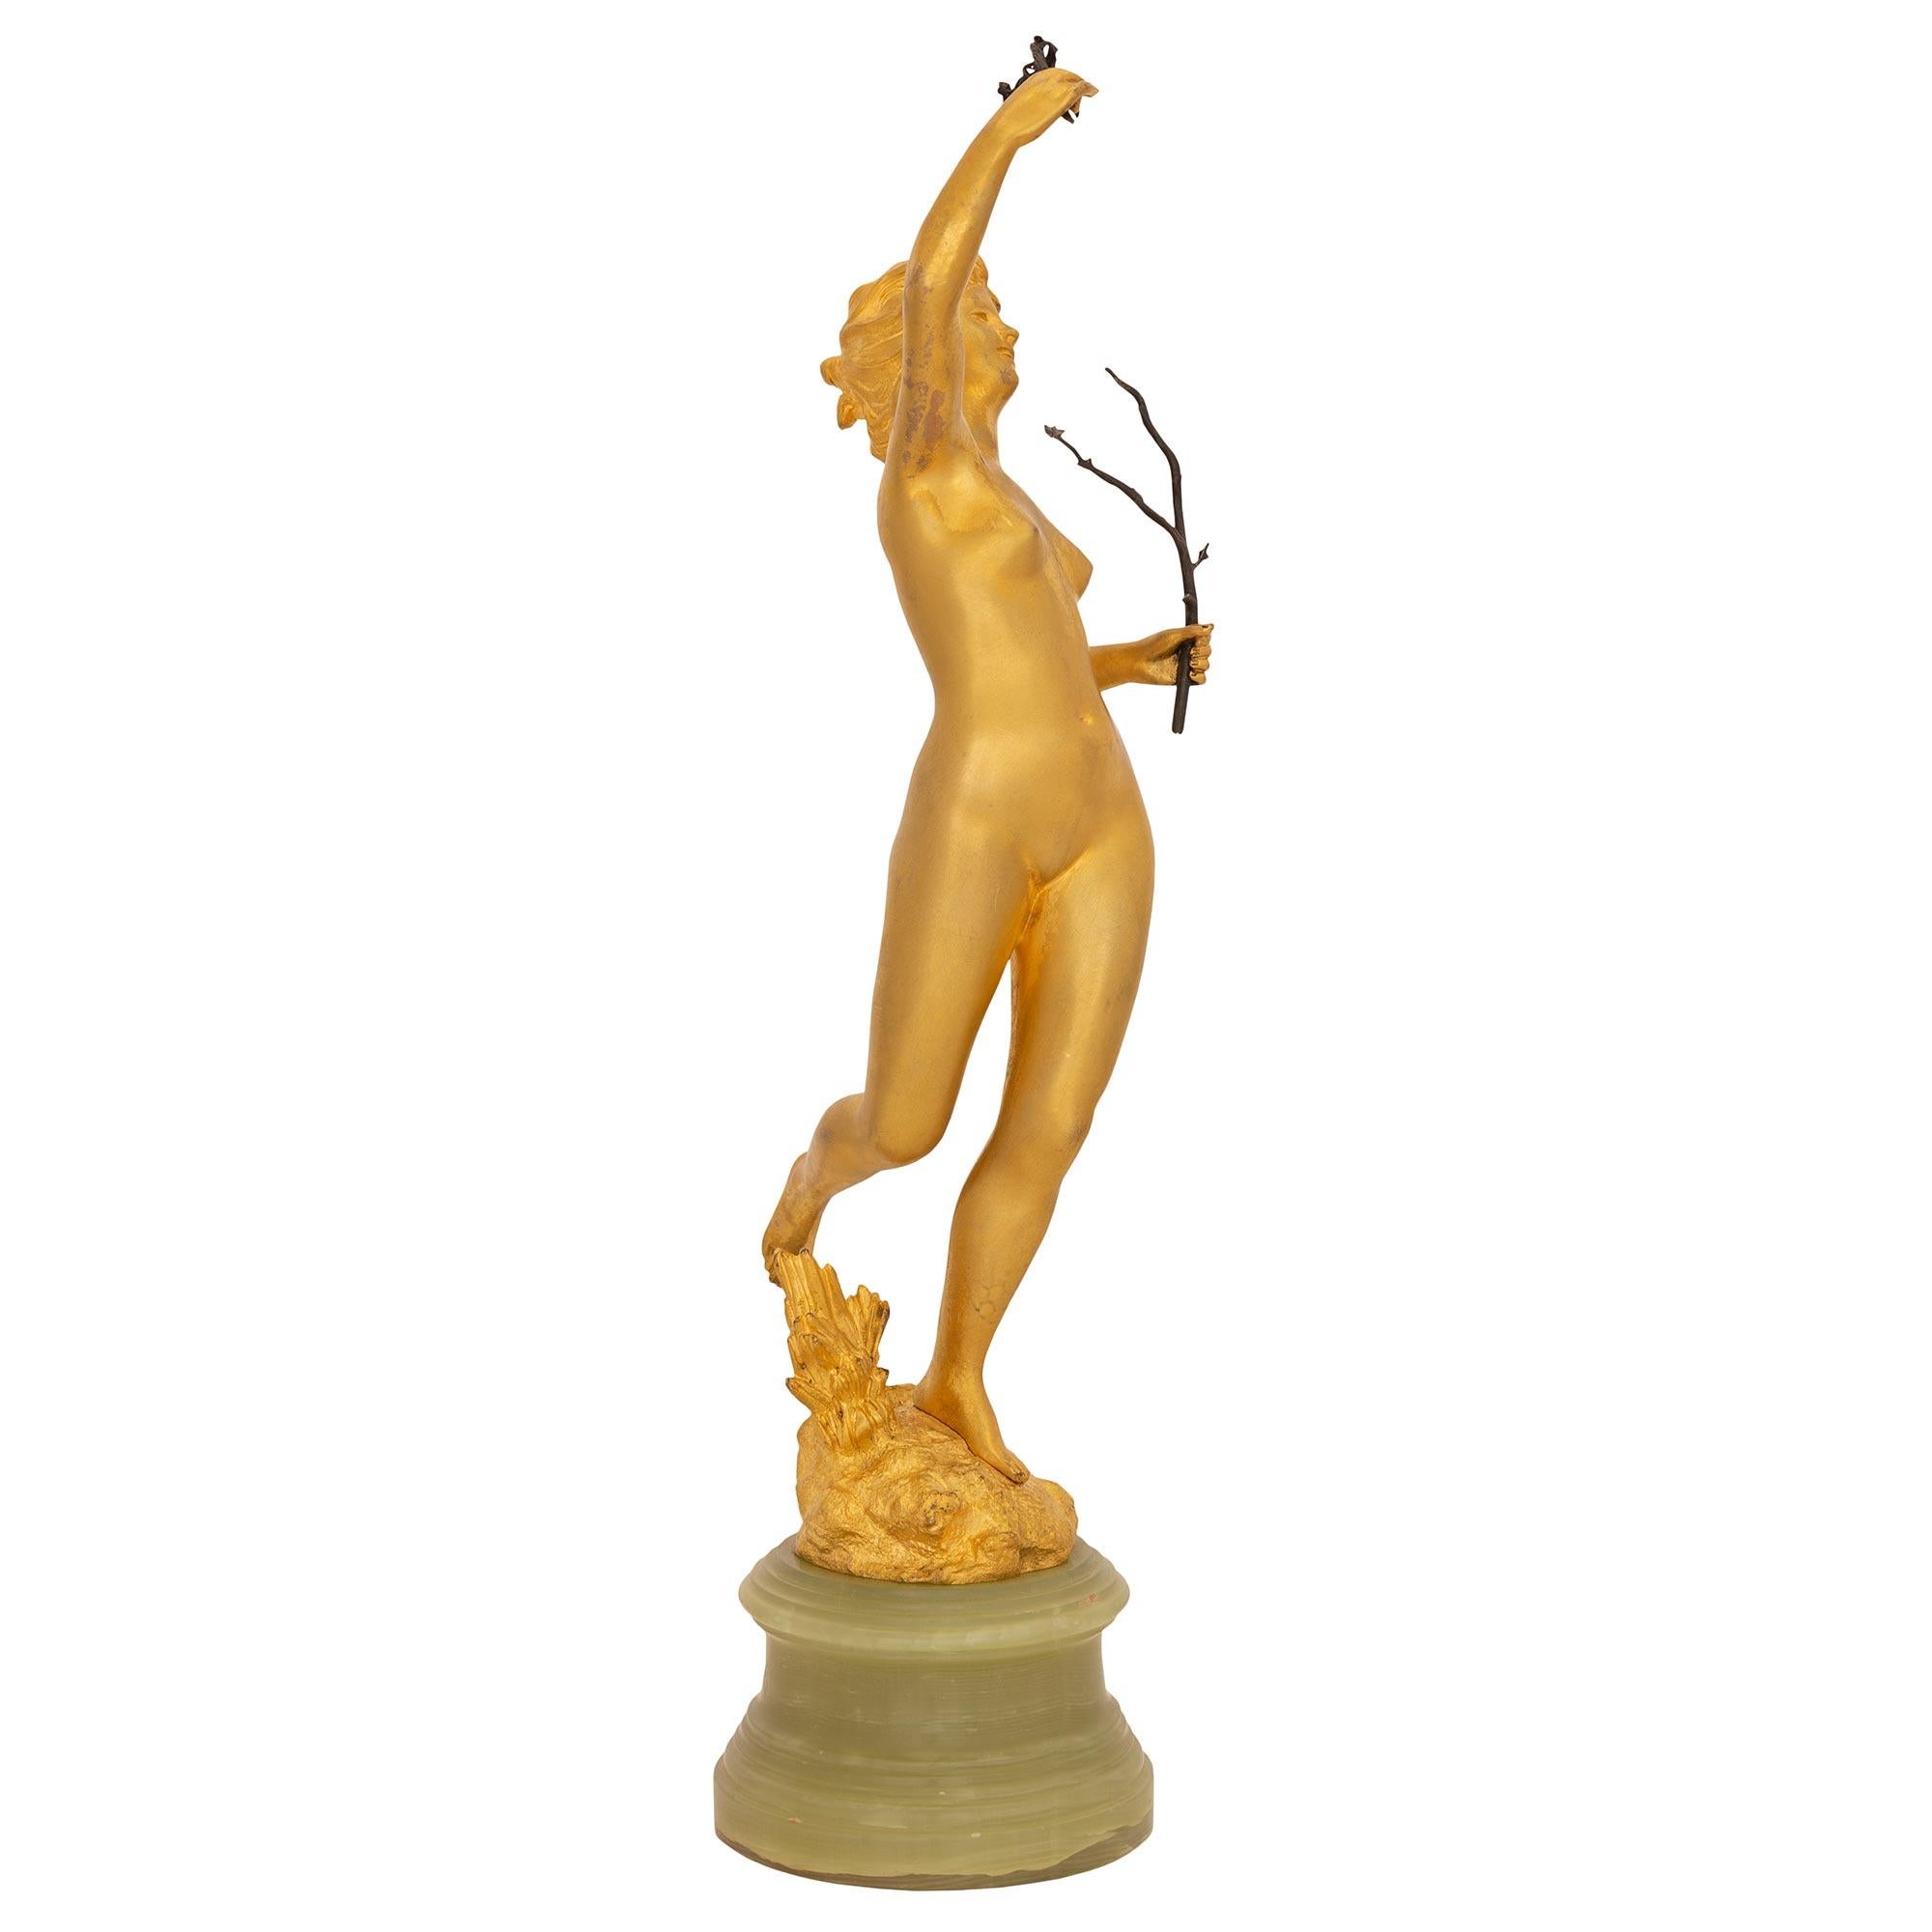 A striking French 19th century Louis XVI st. ormolu and onyx statue of a maiden in the forest. The statue is raised by a lovely circular onyx base with a mottled stepped design. The beautiful nude maiden stands on a wonderfully executed rock